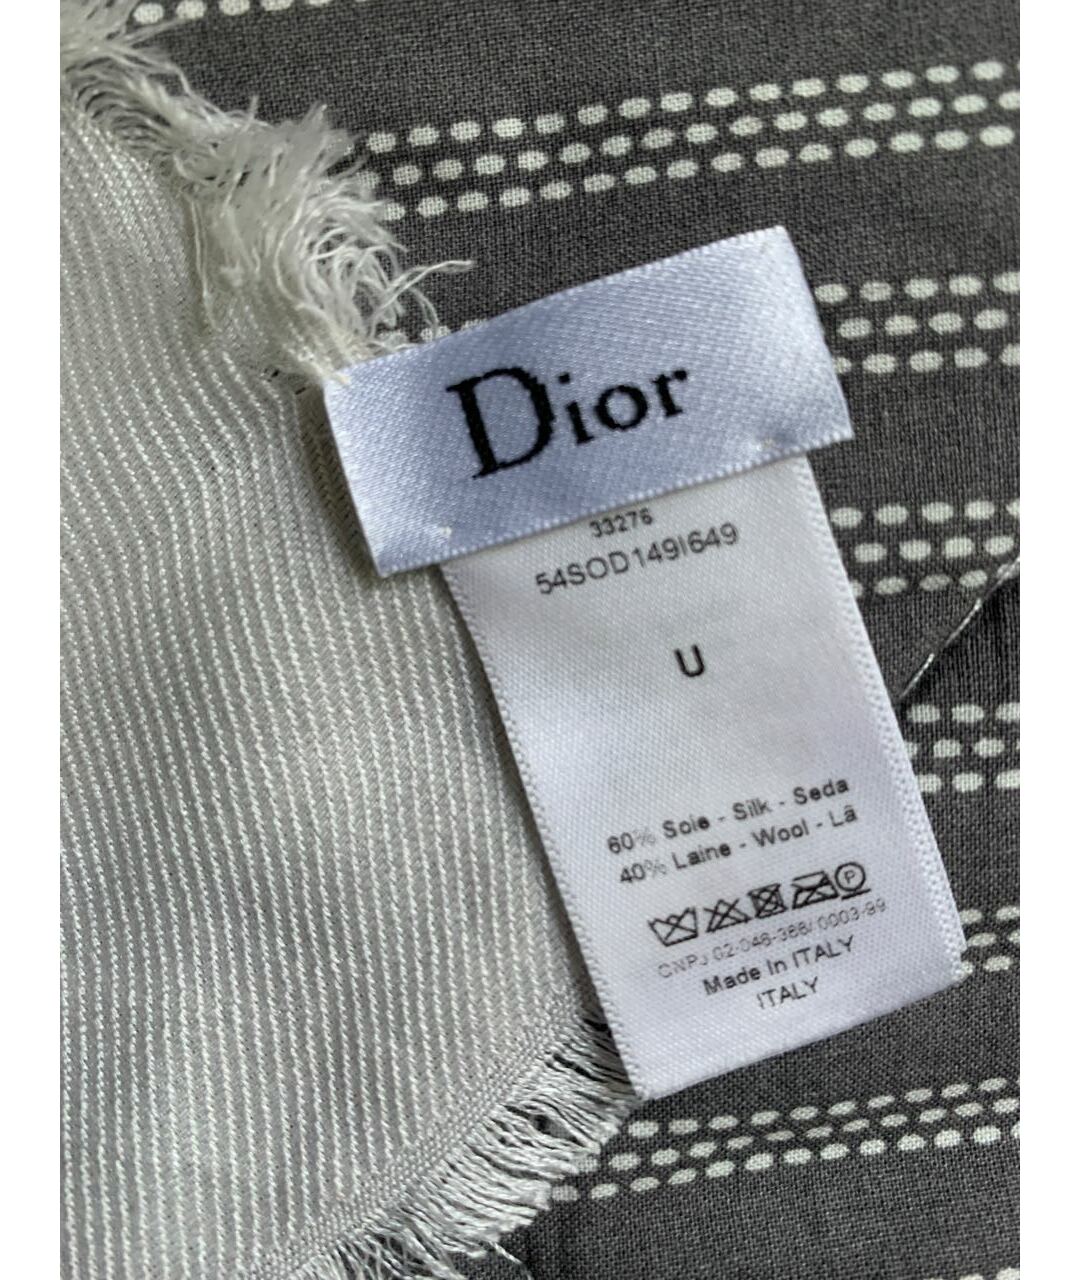 CHRISTIAN DIOR PRE-OWNED Мульти шелковый шарф, фото 3